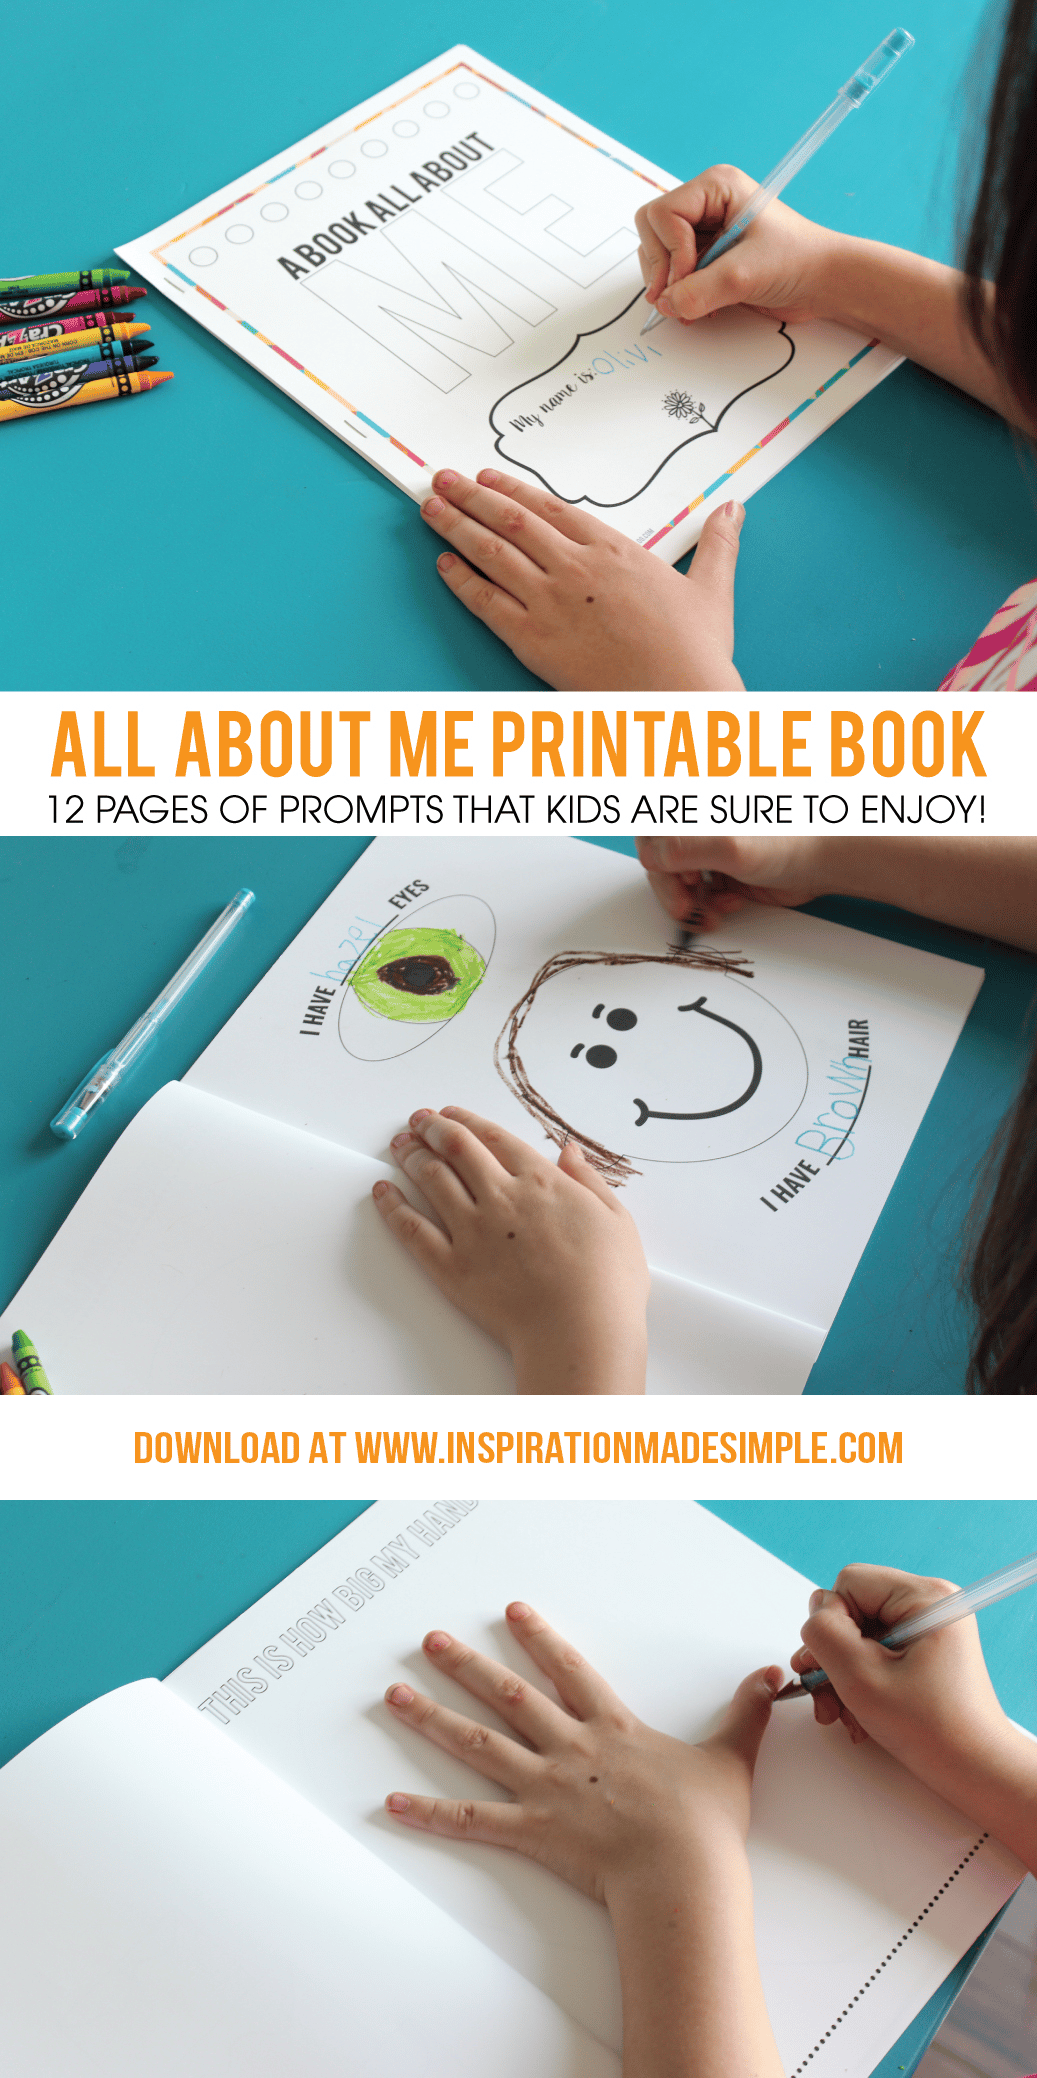 All About Me Printable Book for Kids